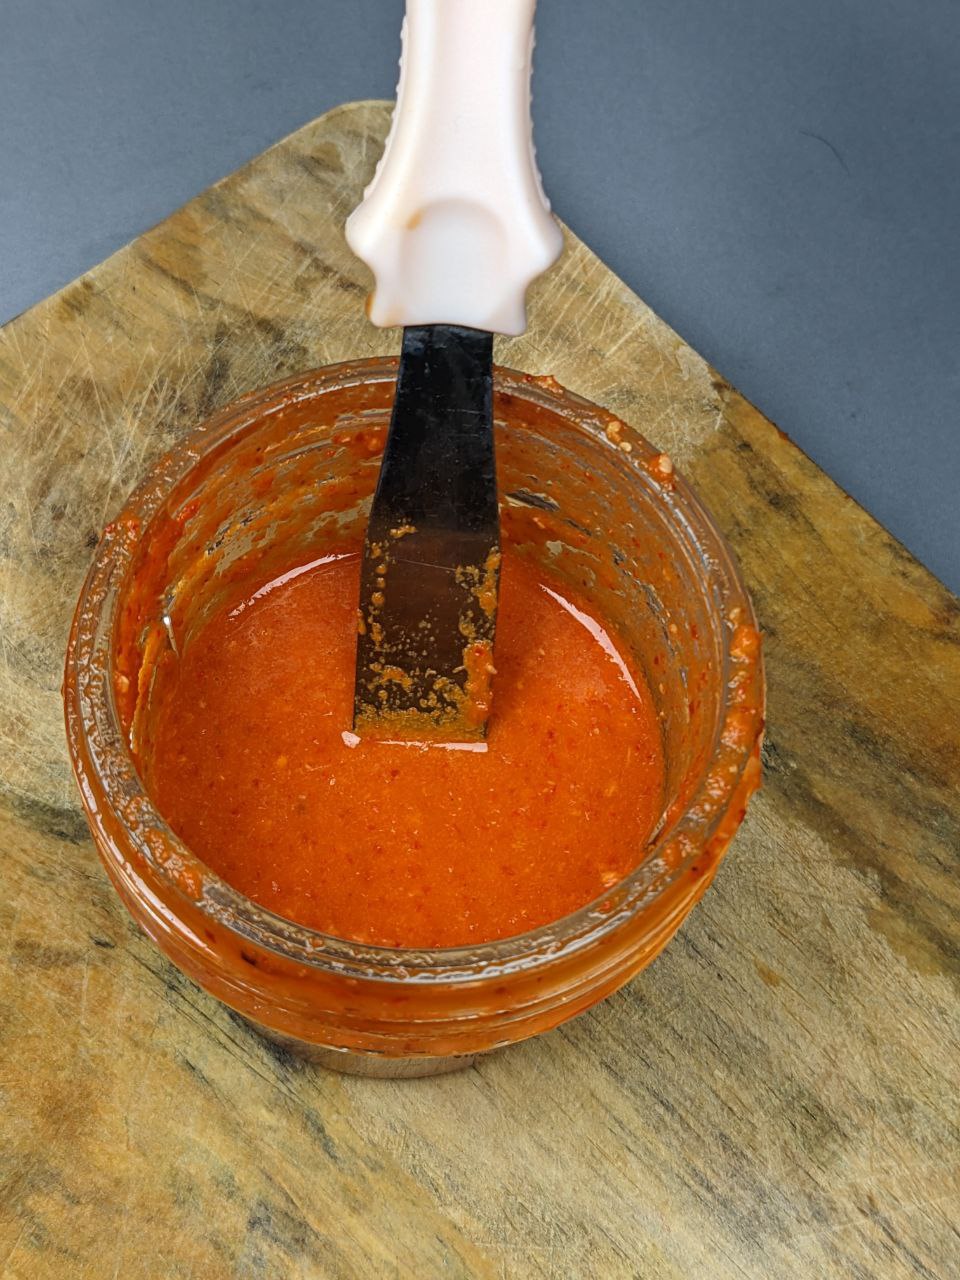 You are currently viewing Home Made Bird’s Eye Chili Sauce